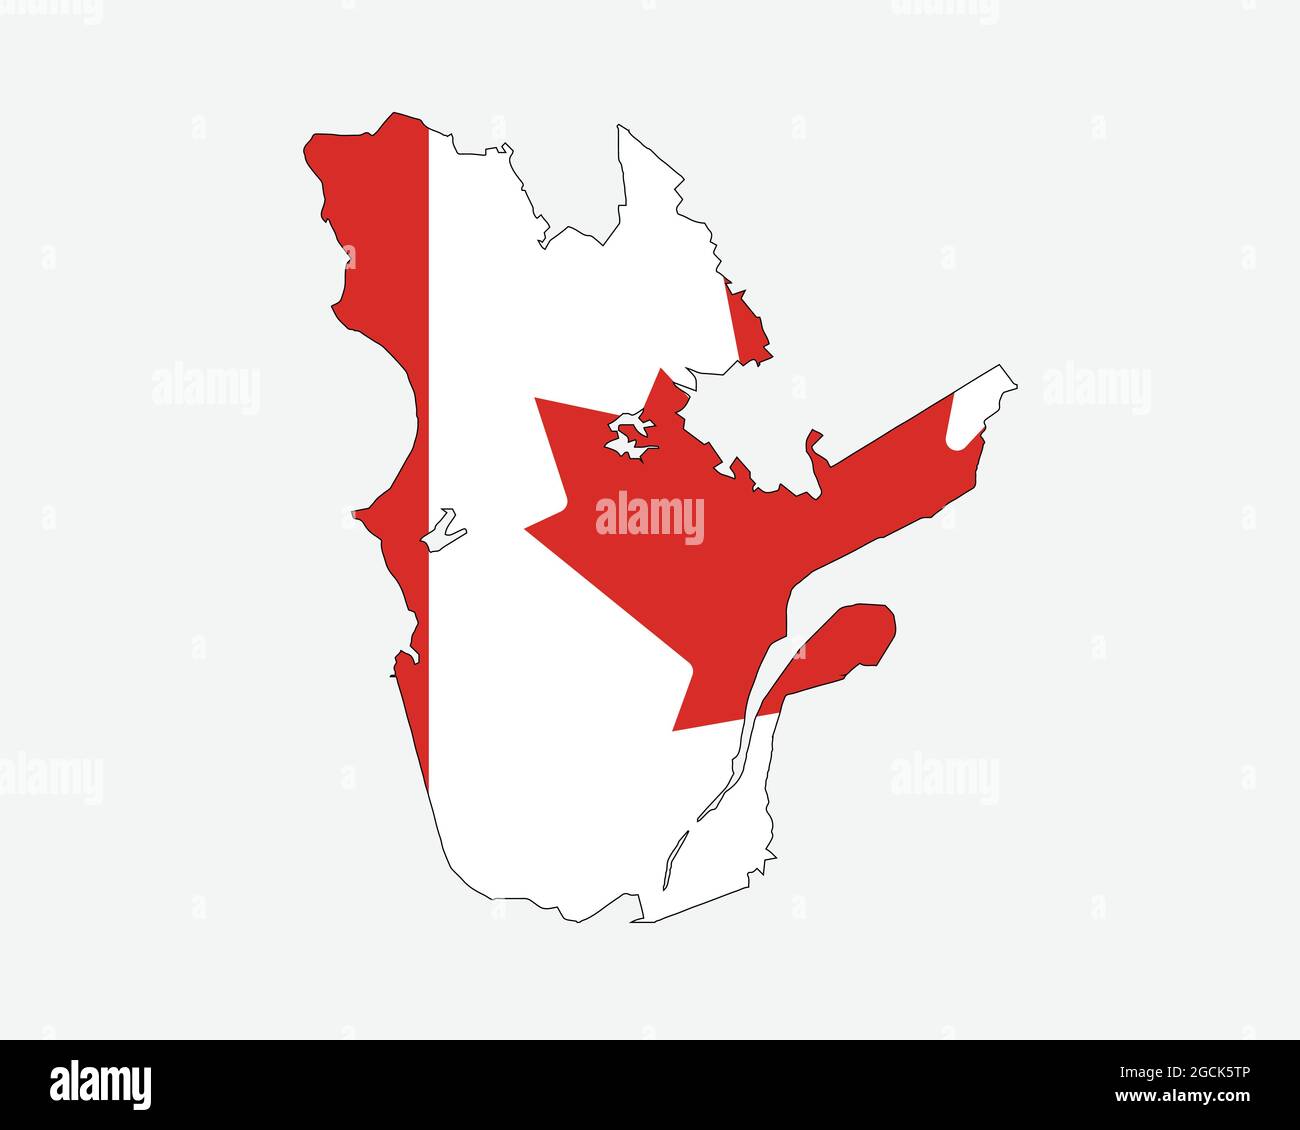 Quebec Map on Canadian Flag. QC, CA Province Map on Canada Flag. EPS Vector Graphic Clipart Icon Stock Vector